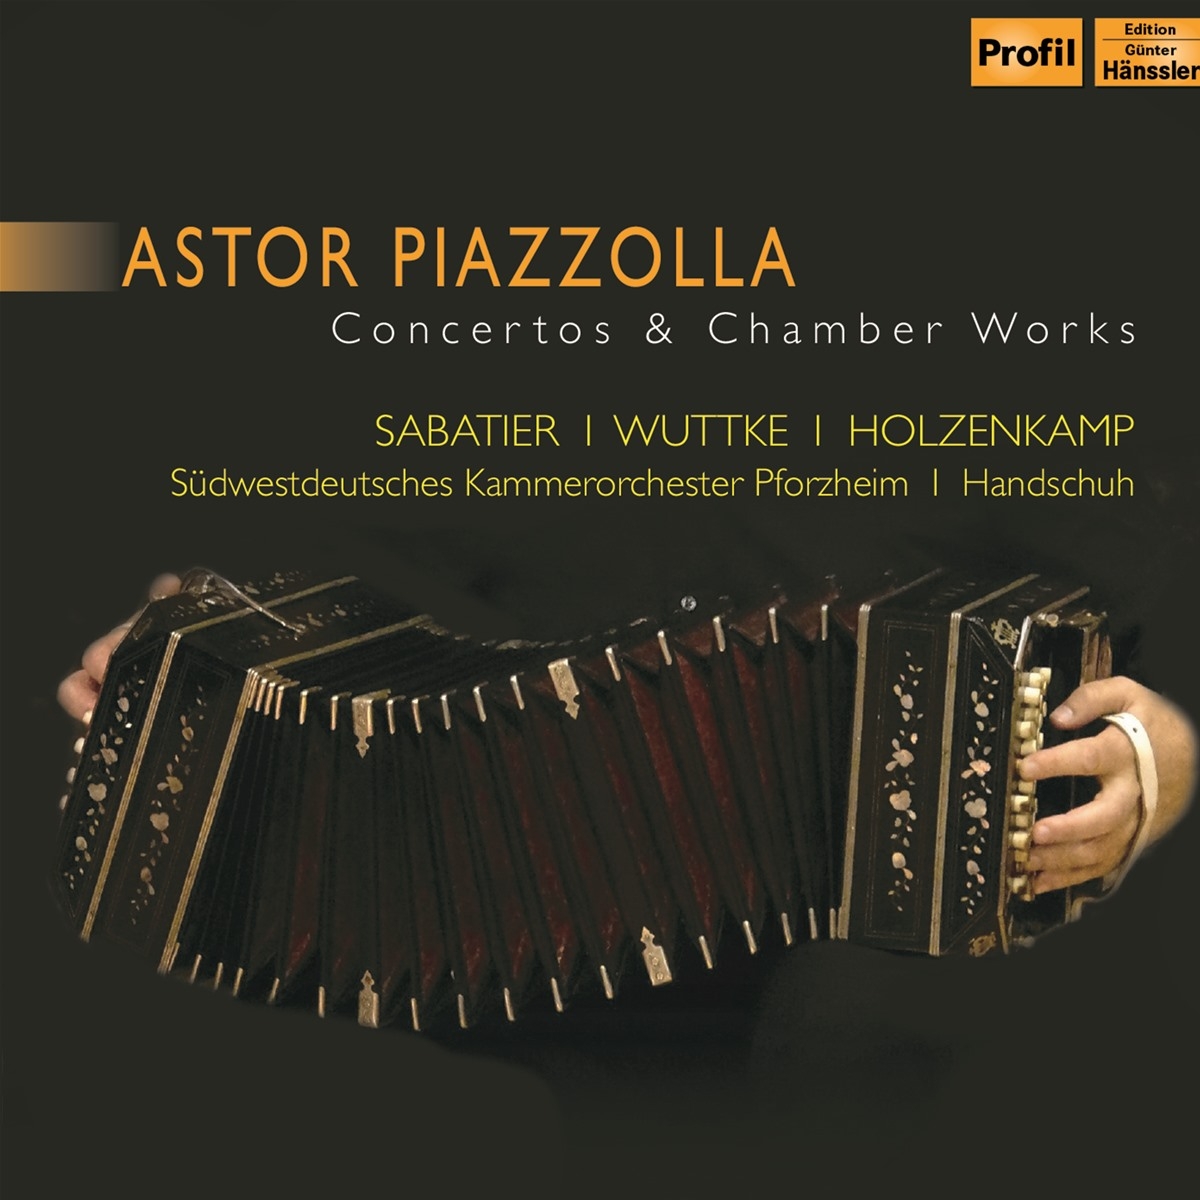 Astor Piazzolla-Concertos & Chamber Works